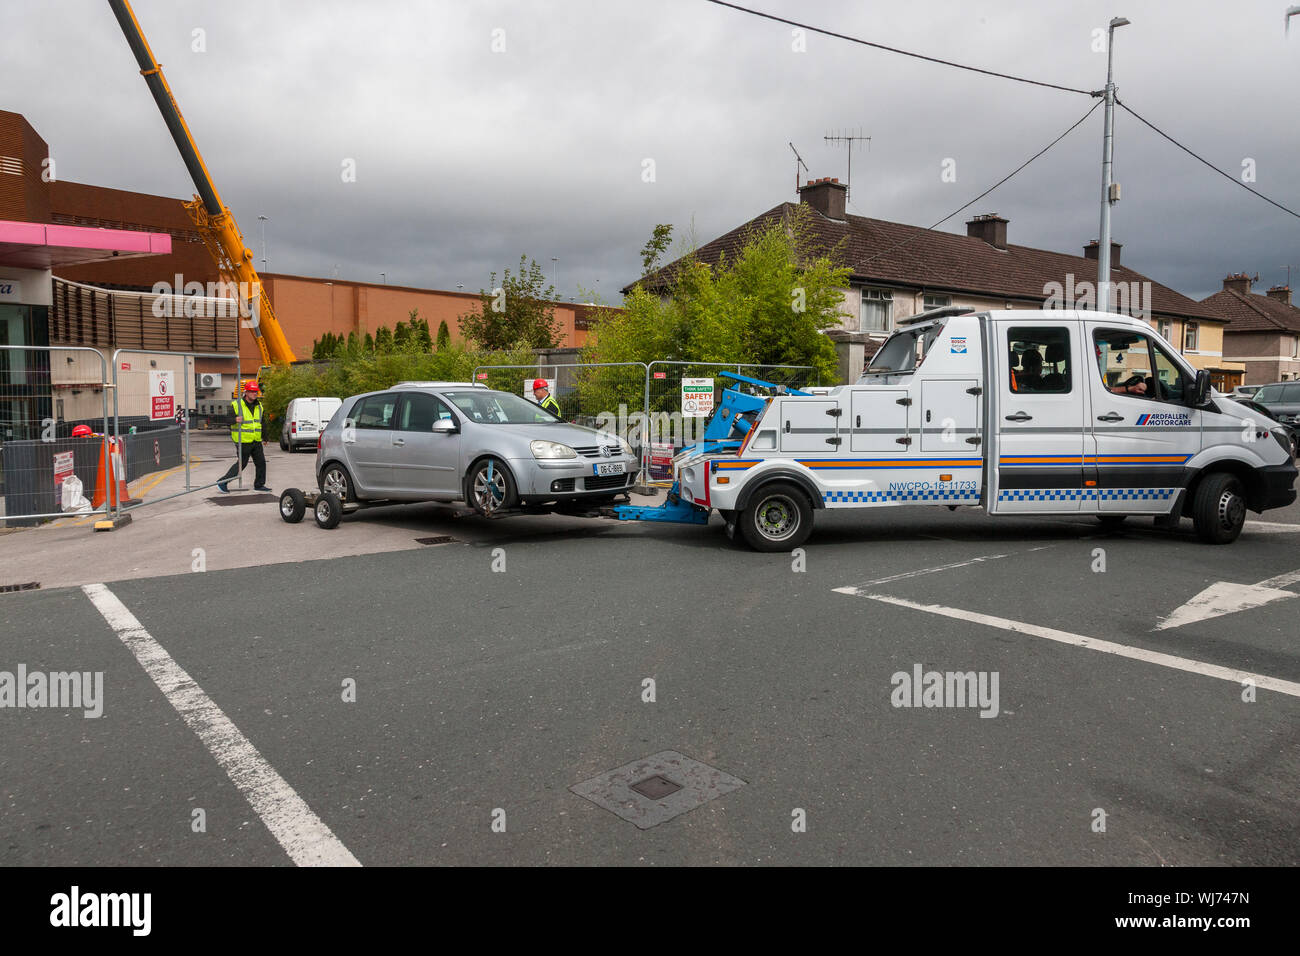 Douglas, Cork, Ireland. 03rd Sep, 2019. The first car to be recovered from the Douglas Shopping Centre Car Park been removed from the site after it was lifted off the roof where over 100 cars have been trapped after a major fire in the multi-storey car park over the weekend. Recovery of the vehicles will take over a week and the building will then be demolished. - Picture; Credit: David Creedon/Alamy Live News Stock Photo